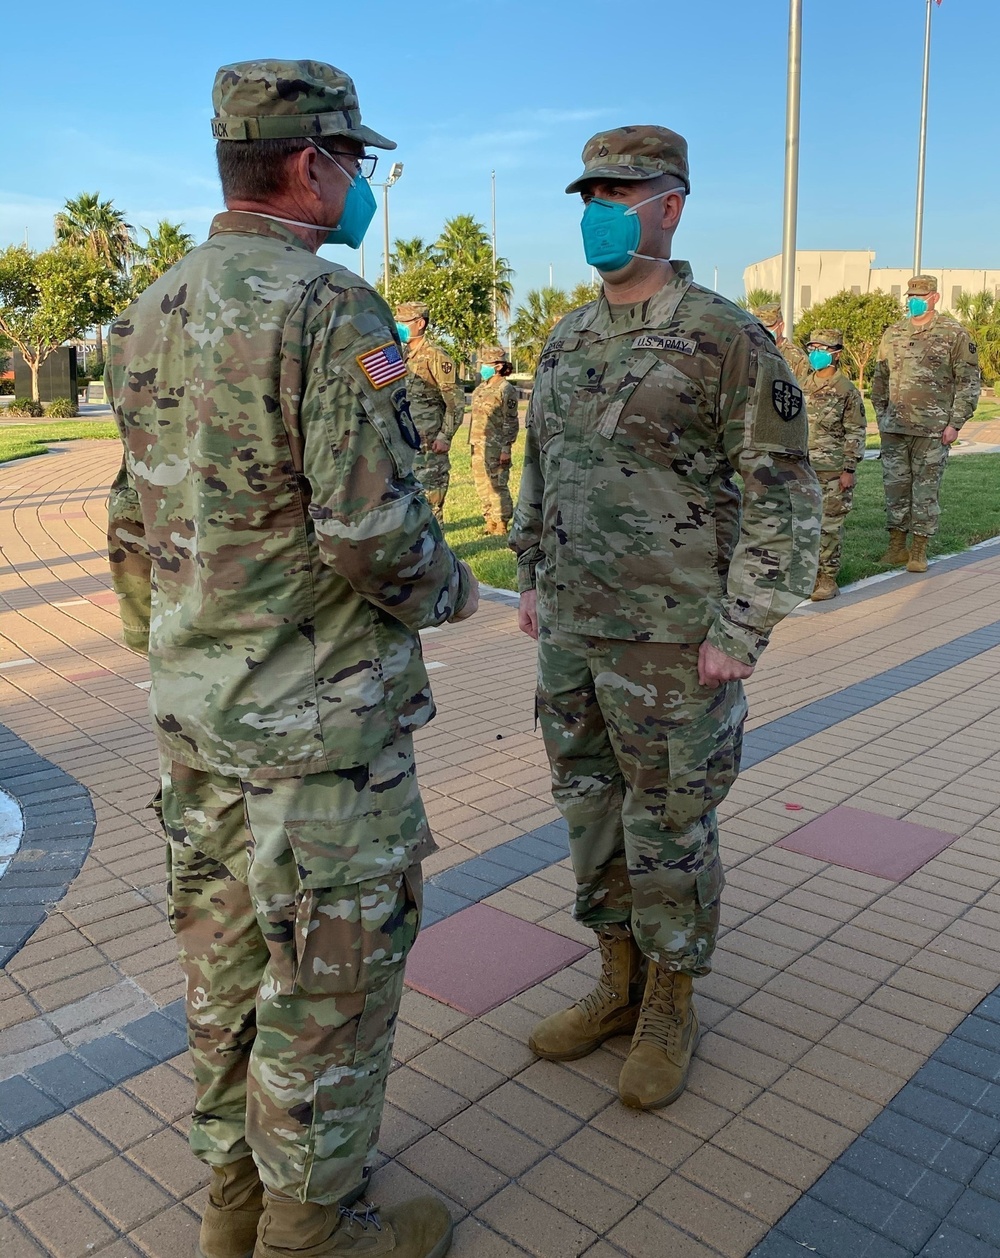 Army Reserve medic promoted during COVID-19 response mobilization